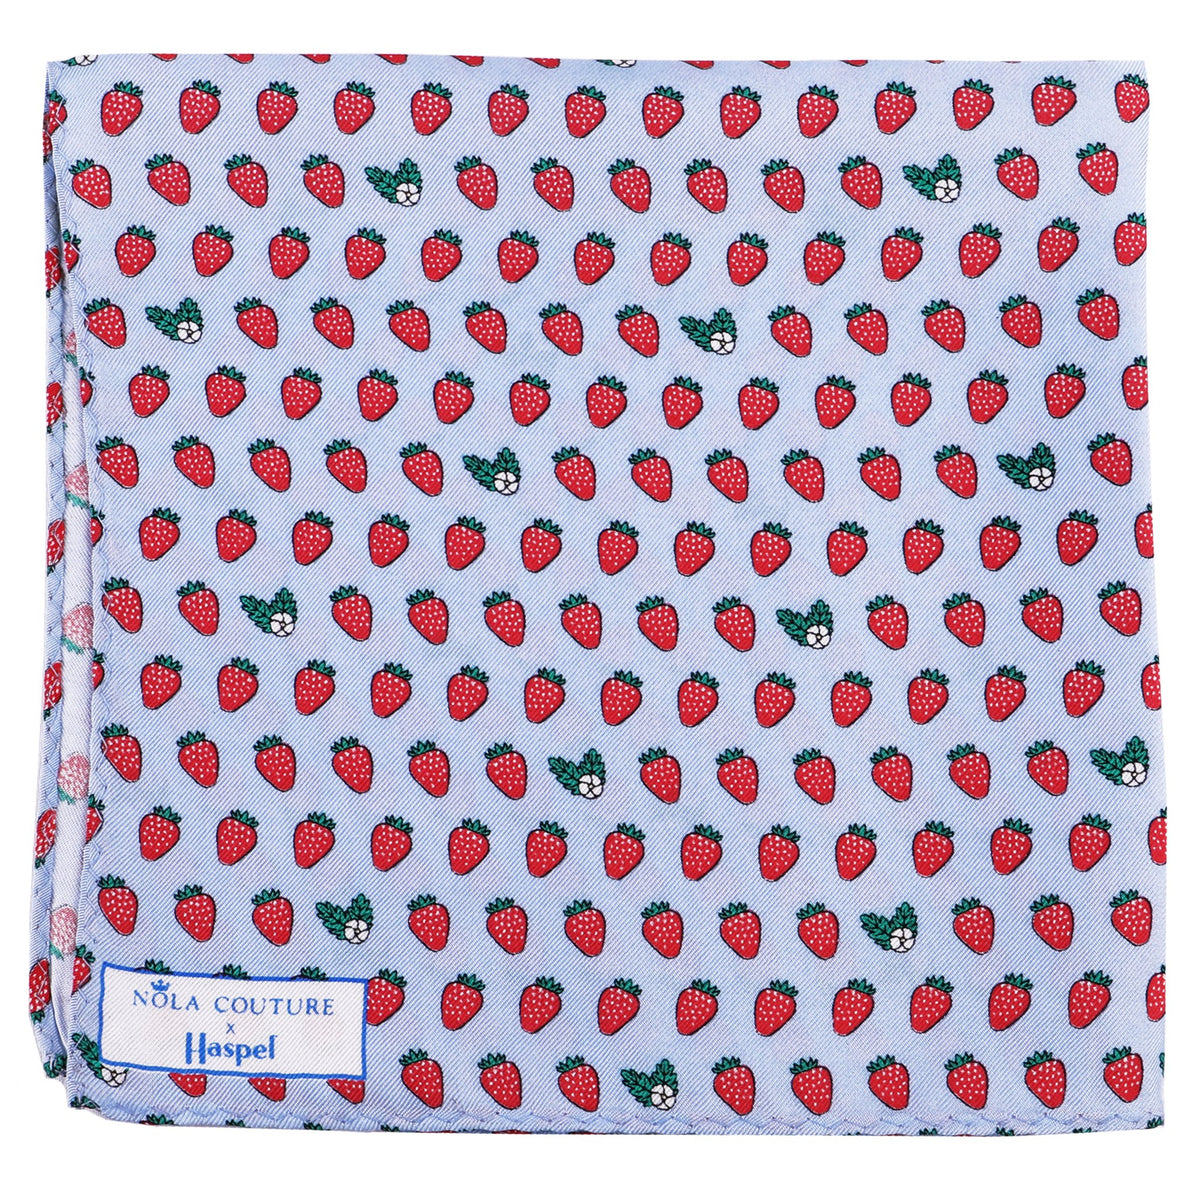 Limited Edition NOLA Couture X Haspel Lt. Blue Strawberry Print Pocket Square - O/S